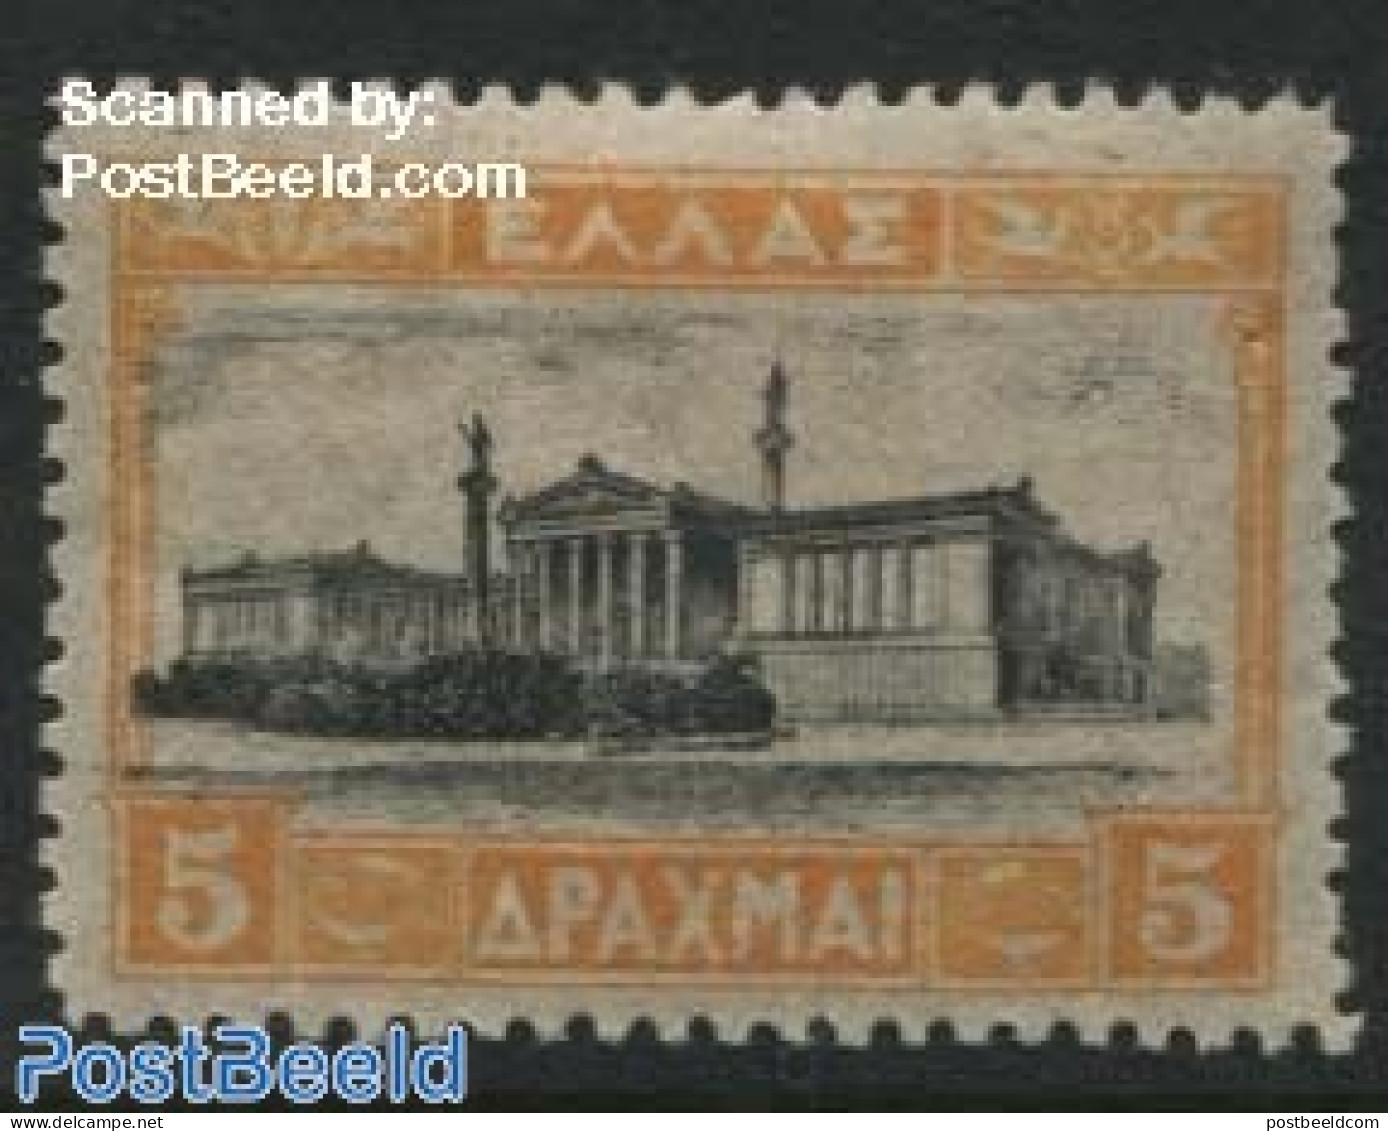 Greece 1927 5Dr, Stamp Out Of Set, Unused (hinged) - Unused Stamps